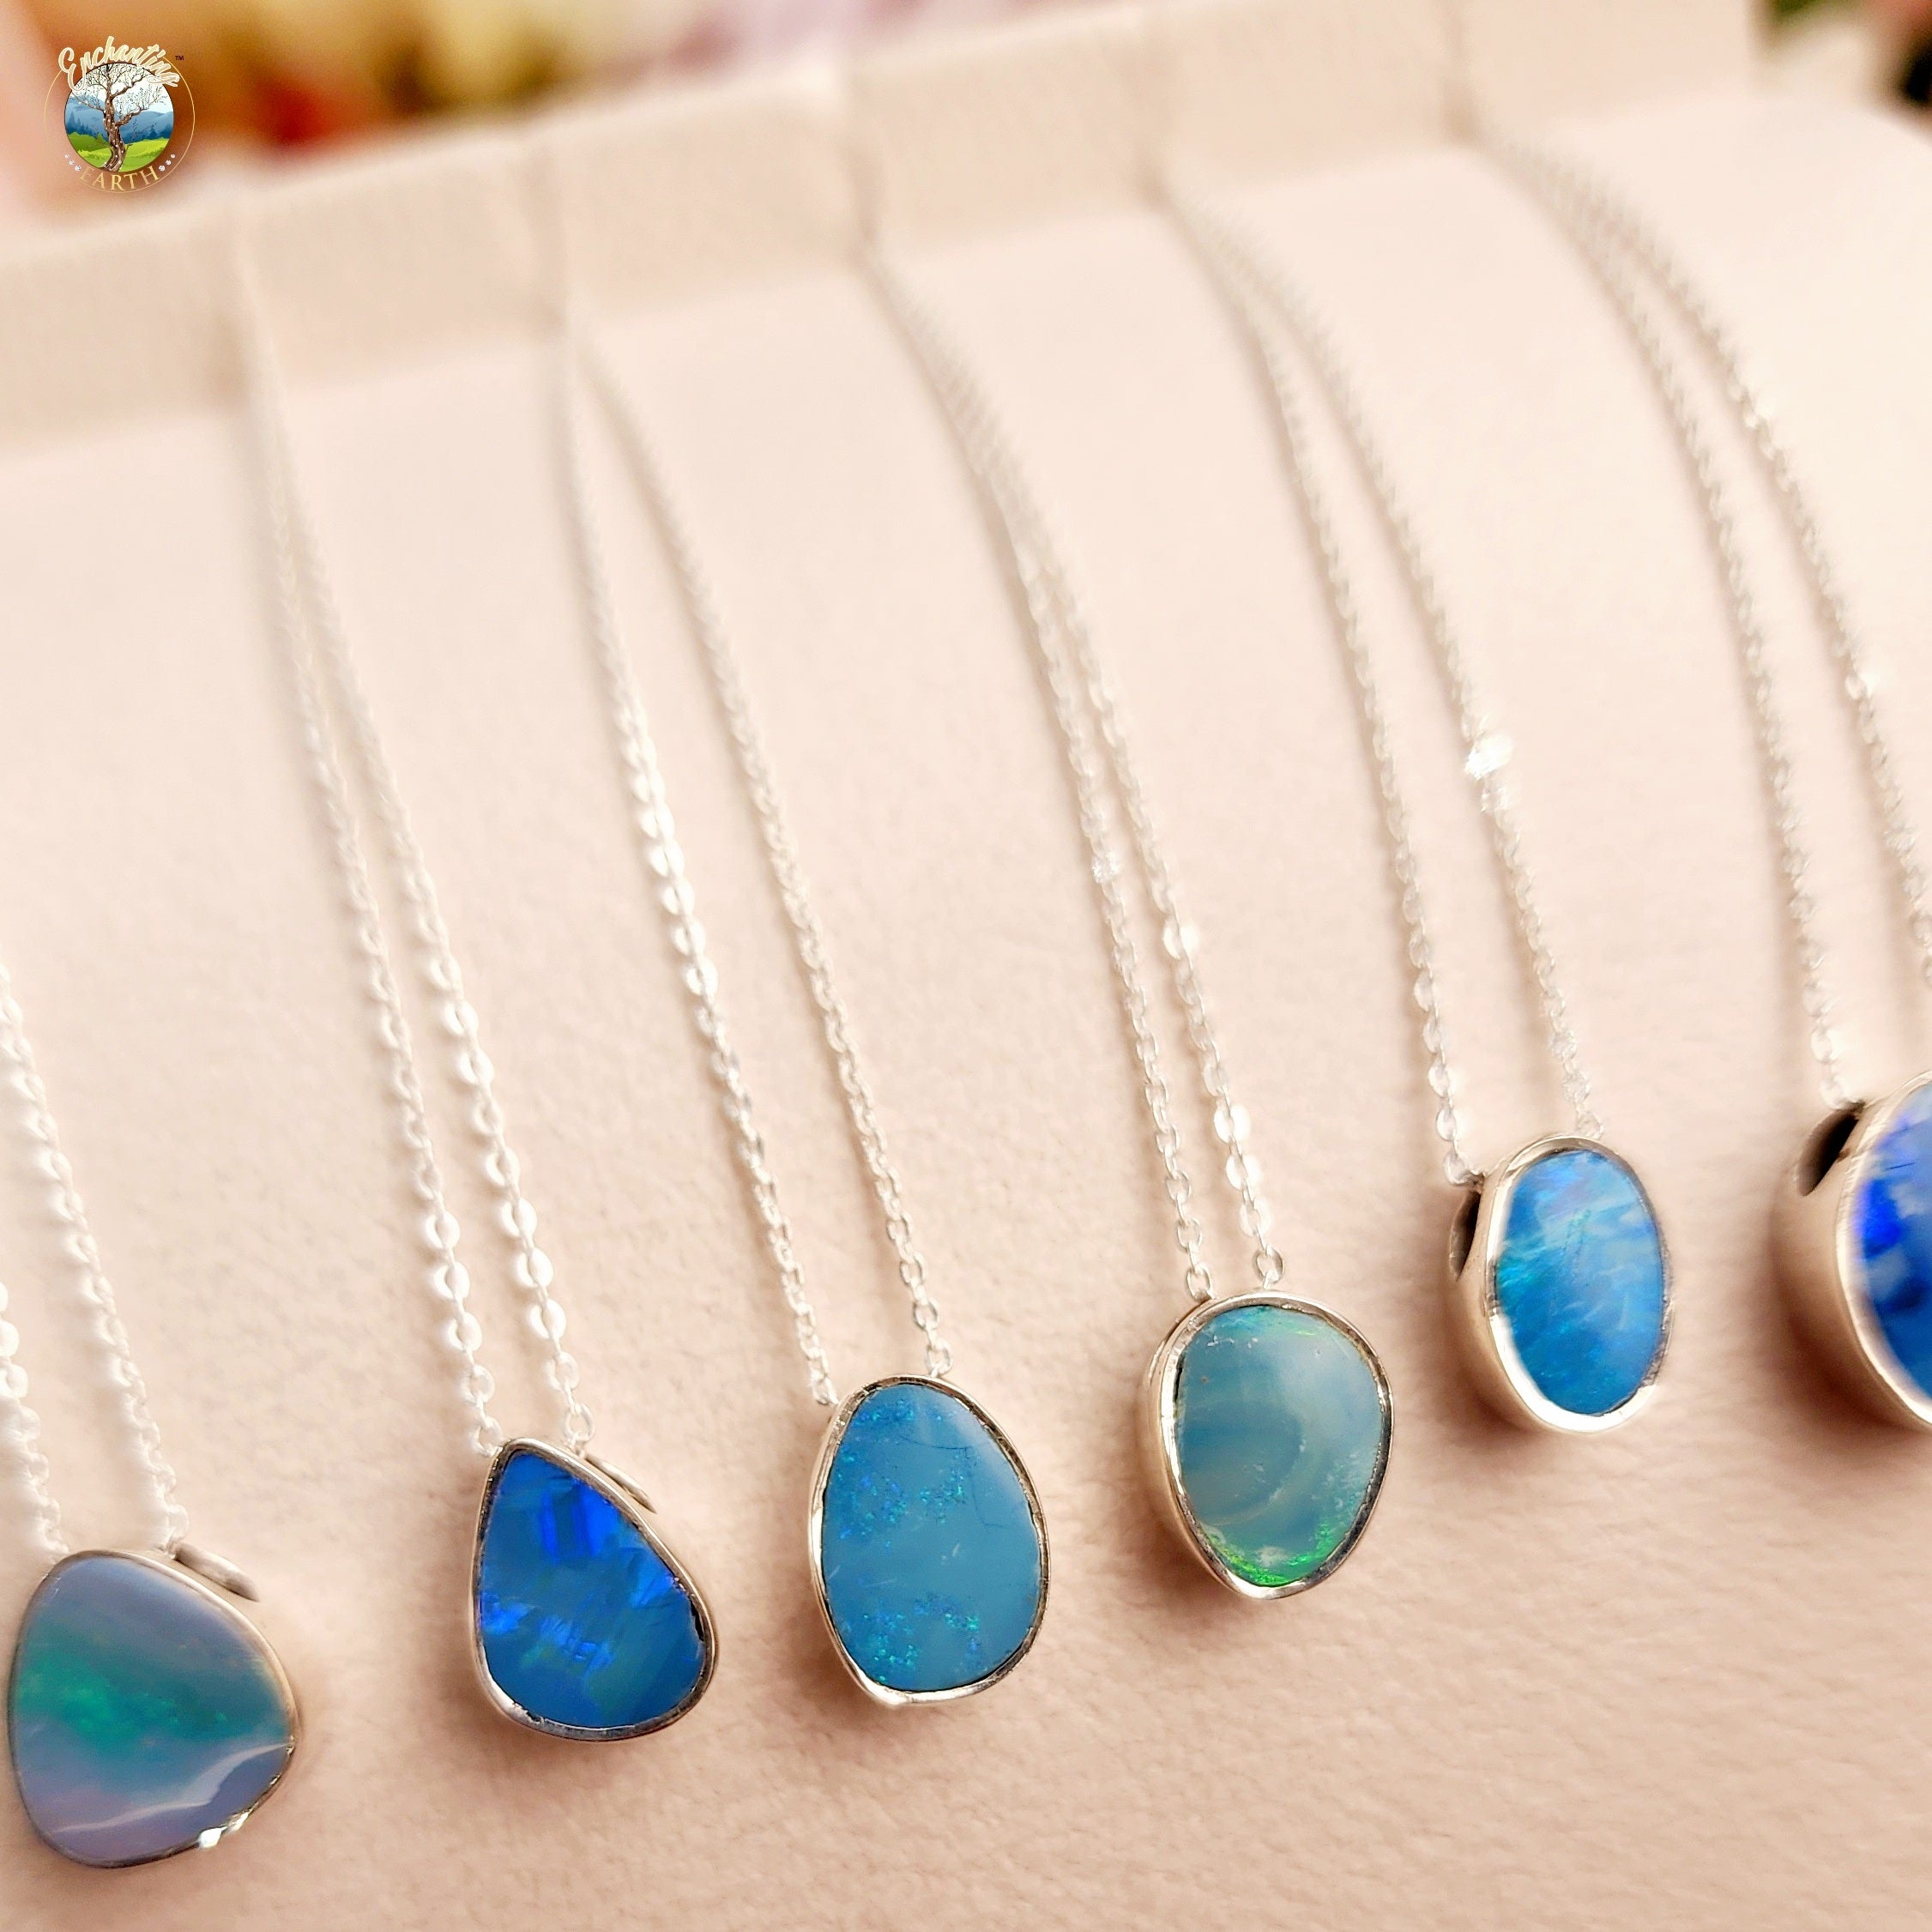 Australian Opal Necklace .925 Silver for Creativity, Joy and Self Discovery